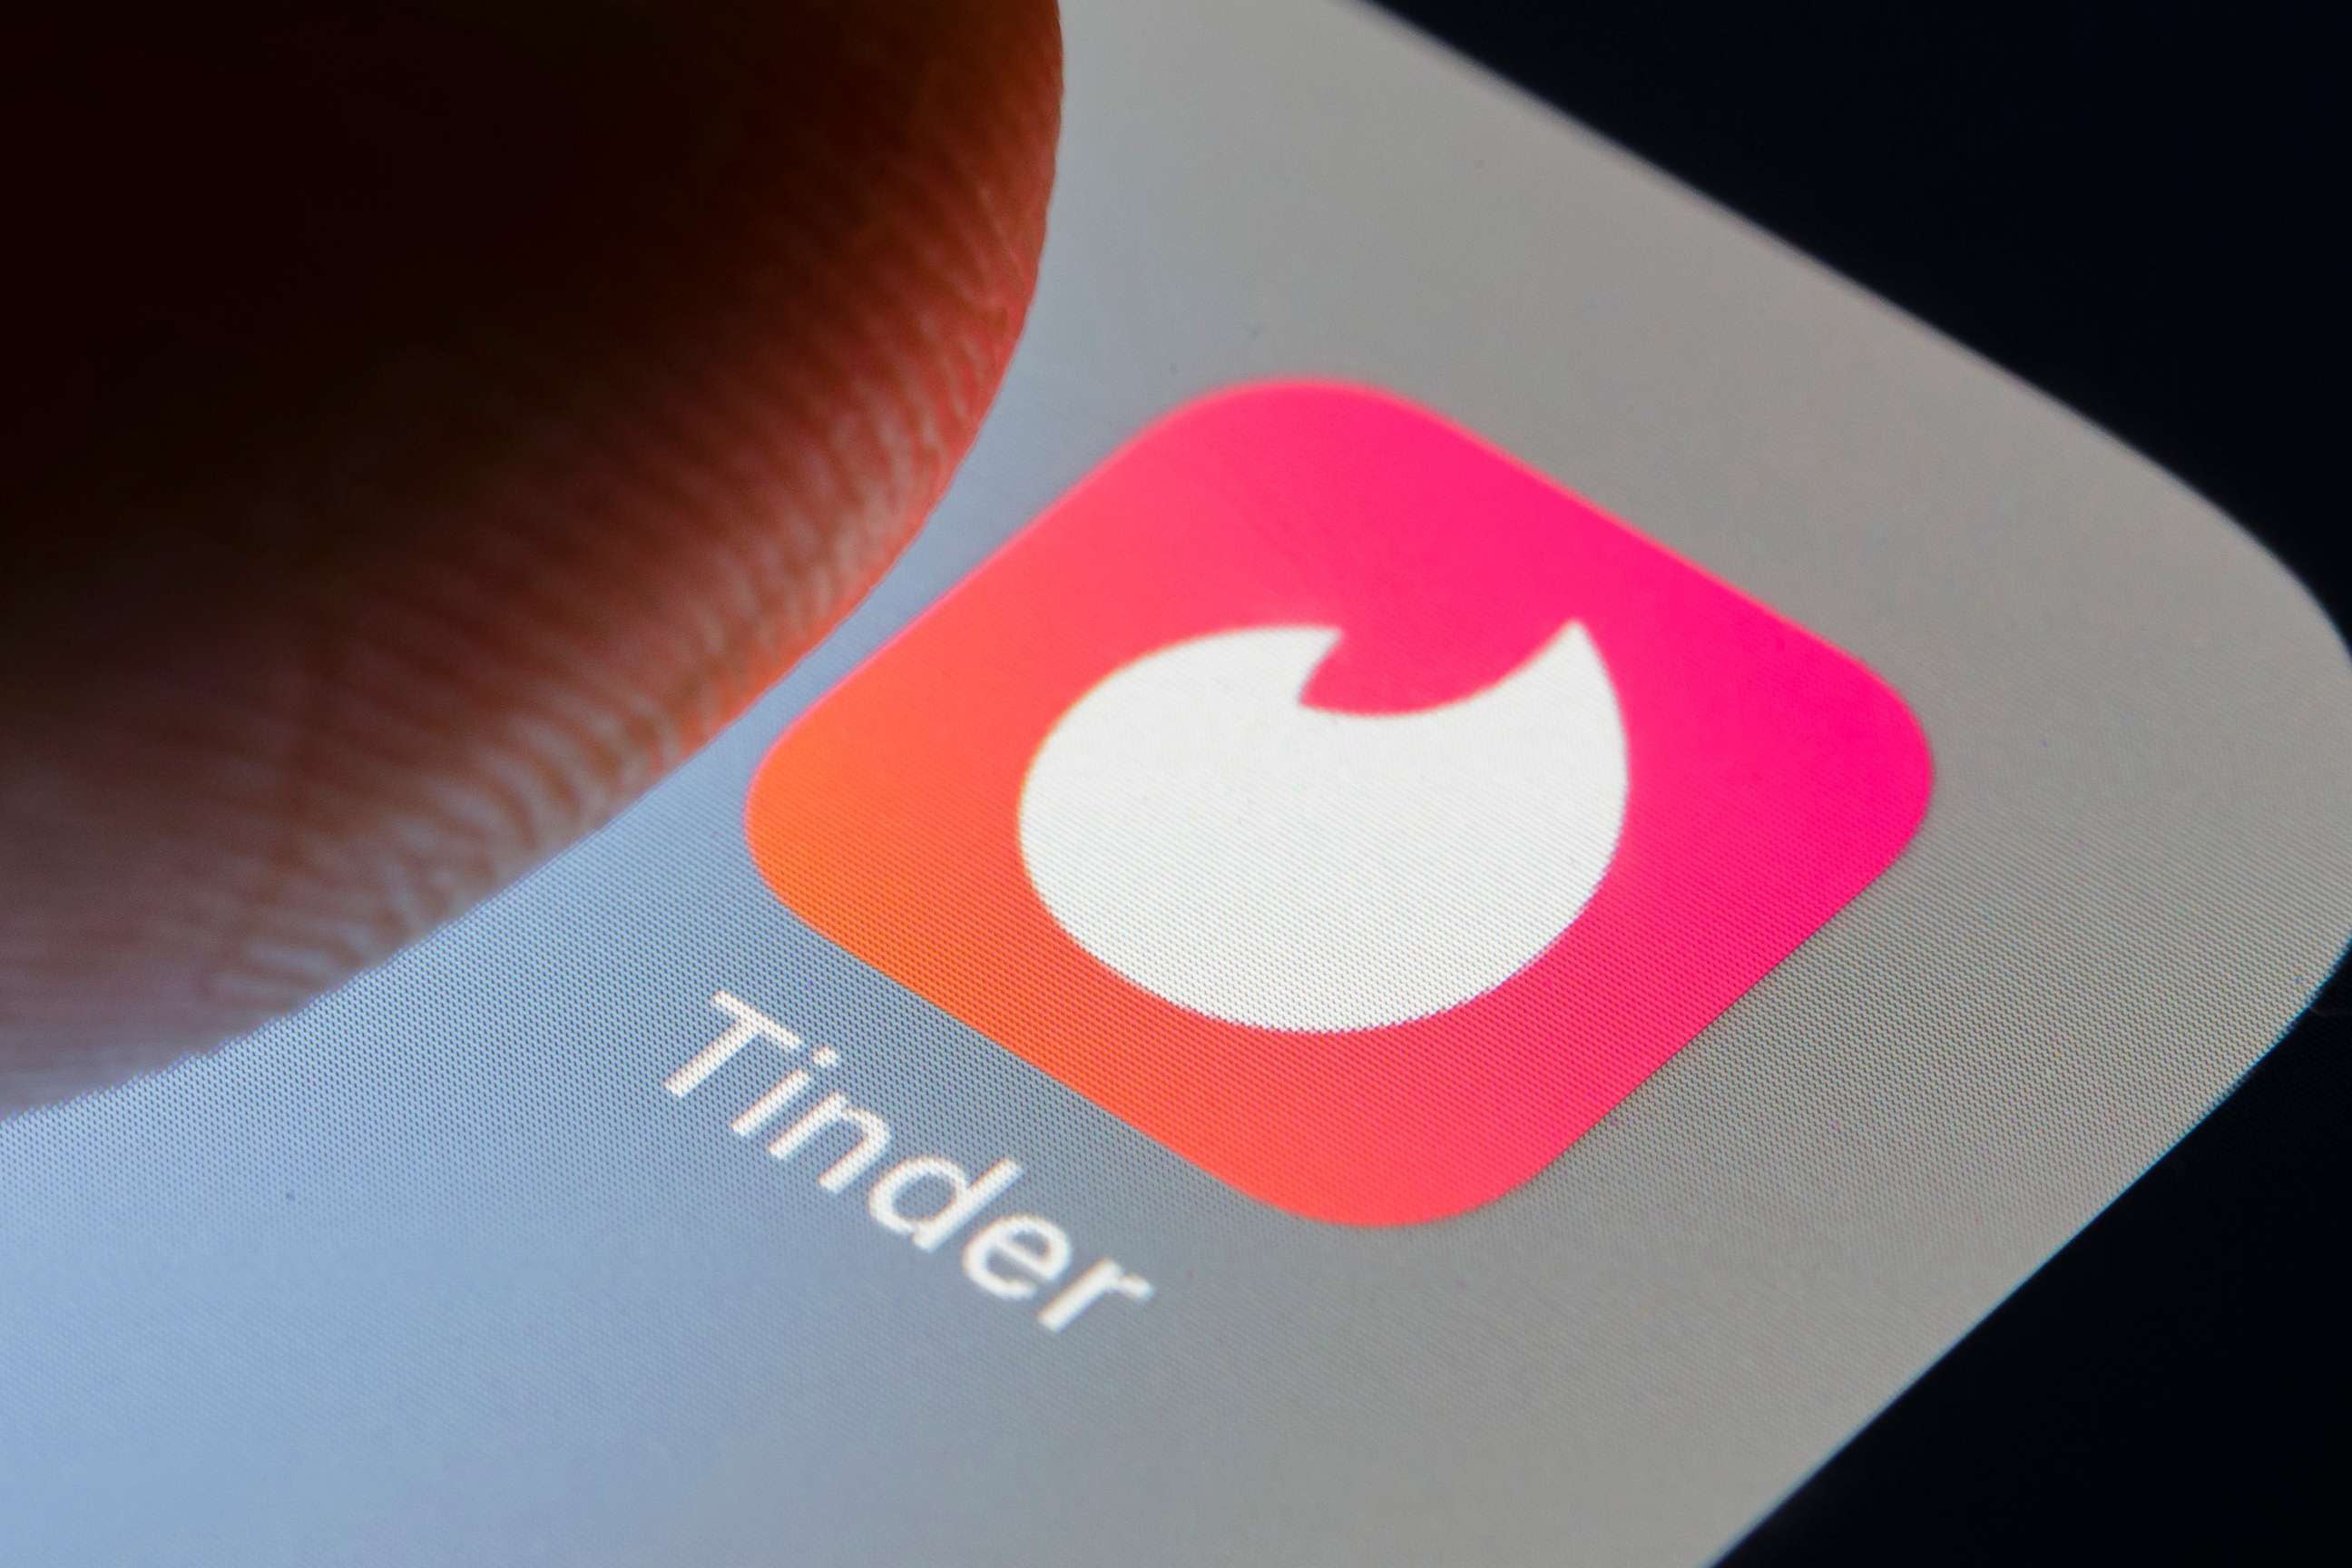 Dating app Tinder is displayed on a smartphone, Feb. 26, 2018 in Berlin, Germany in this photo illustration. (Thomas Trutschel/Photothek via Getty Images)